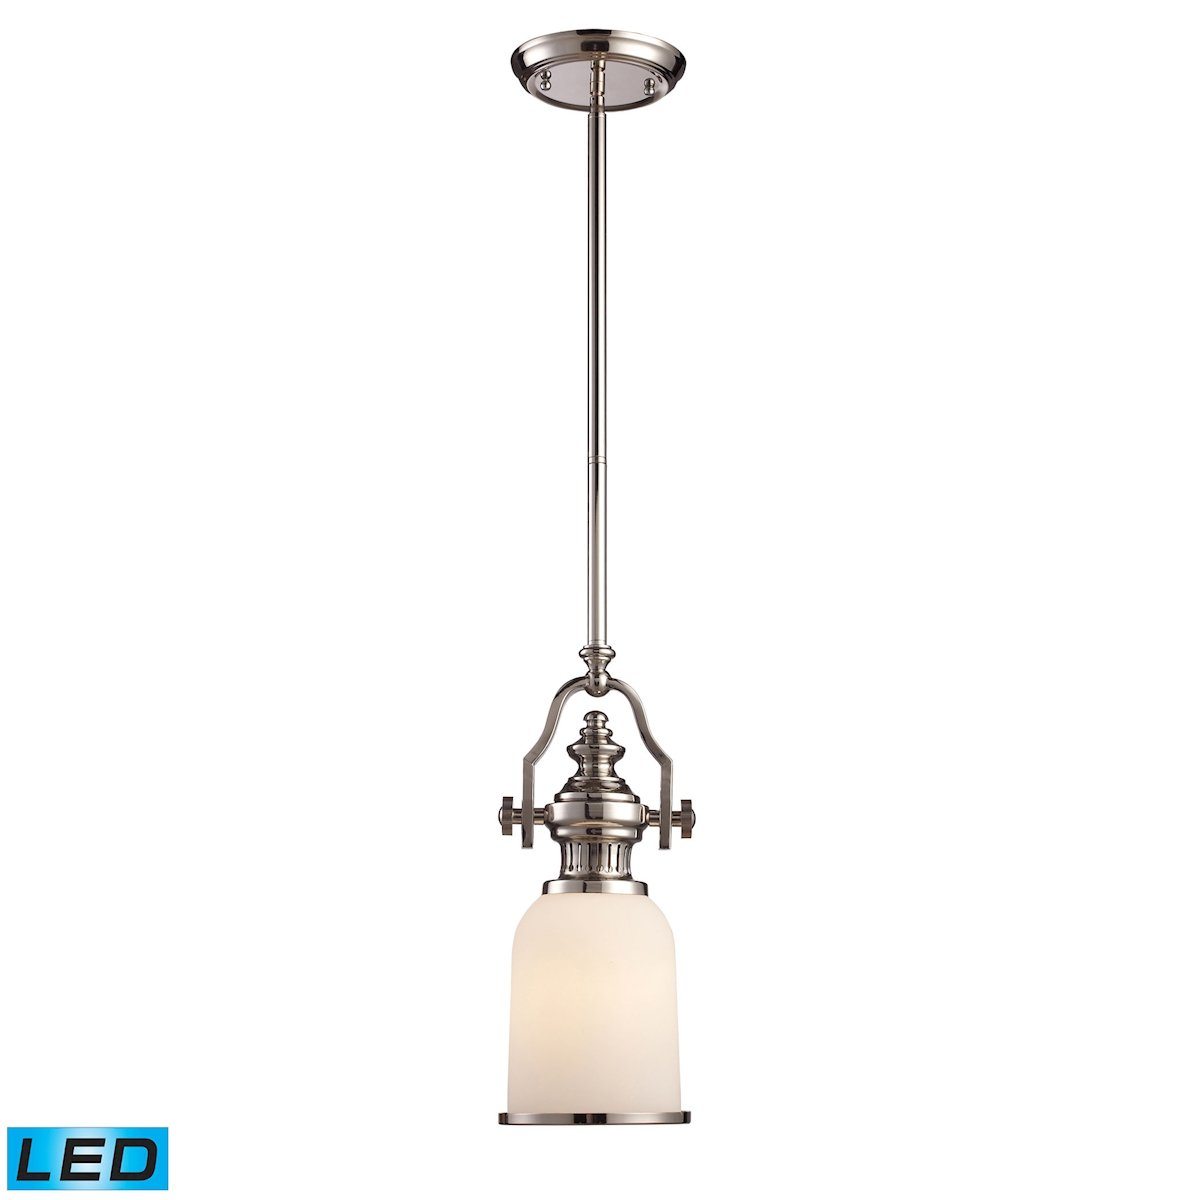 Chadwick LED Mini Pendant In Polished Nickel And White Glass Ceiling Elk Lighting 